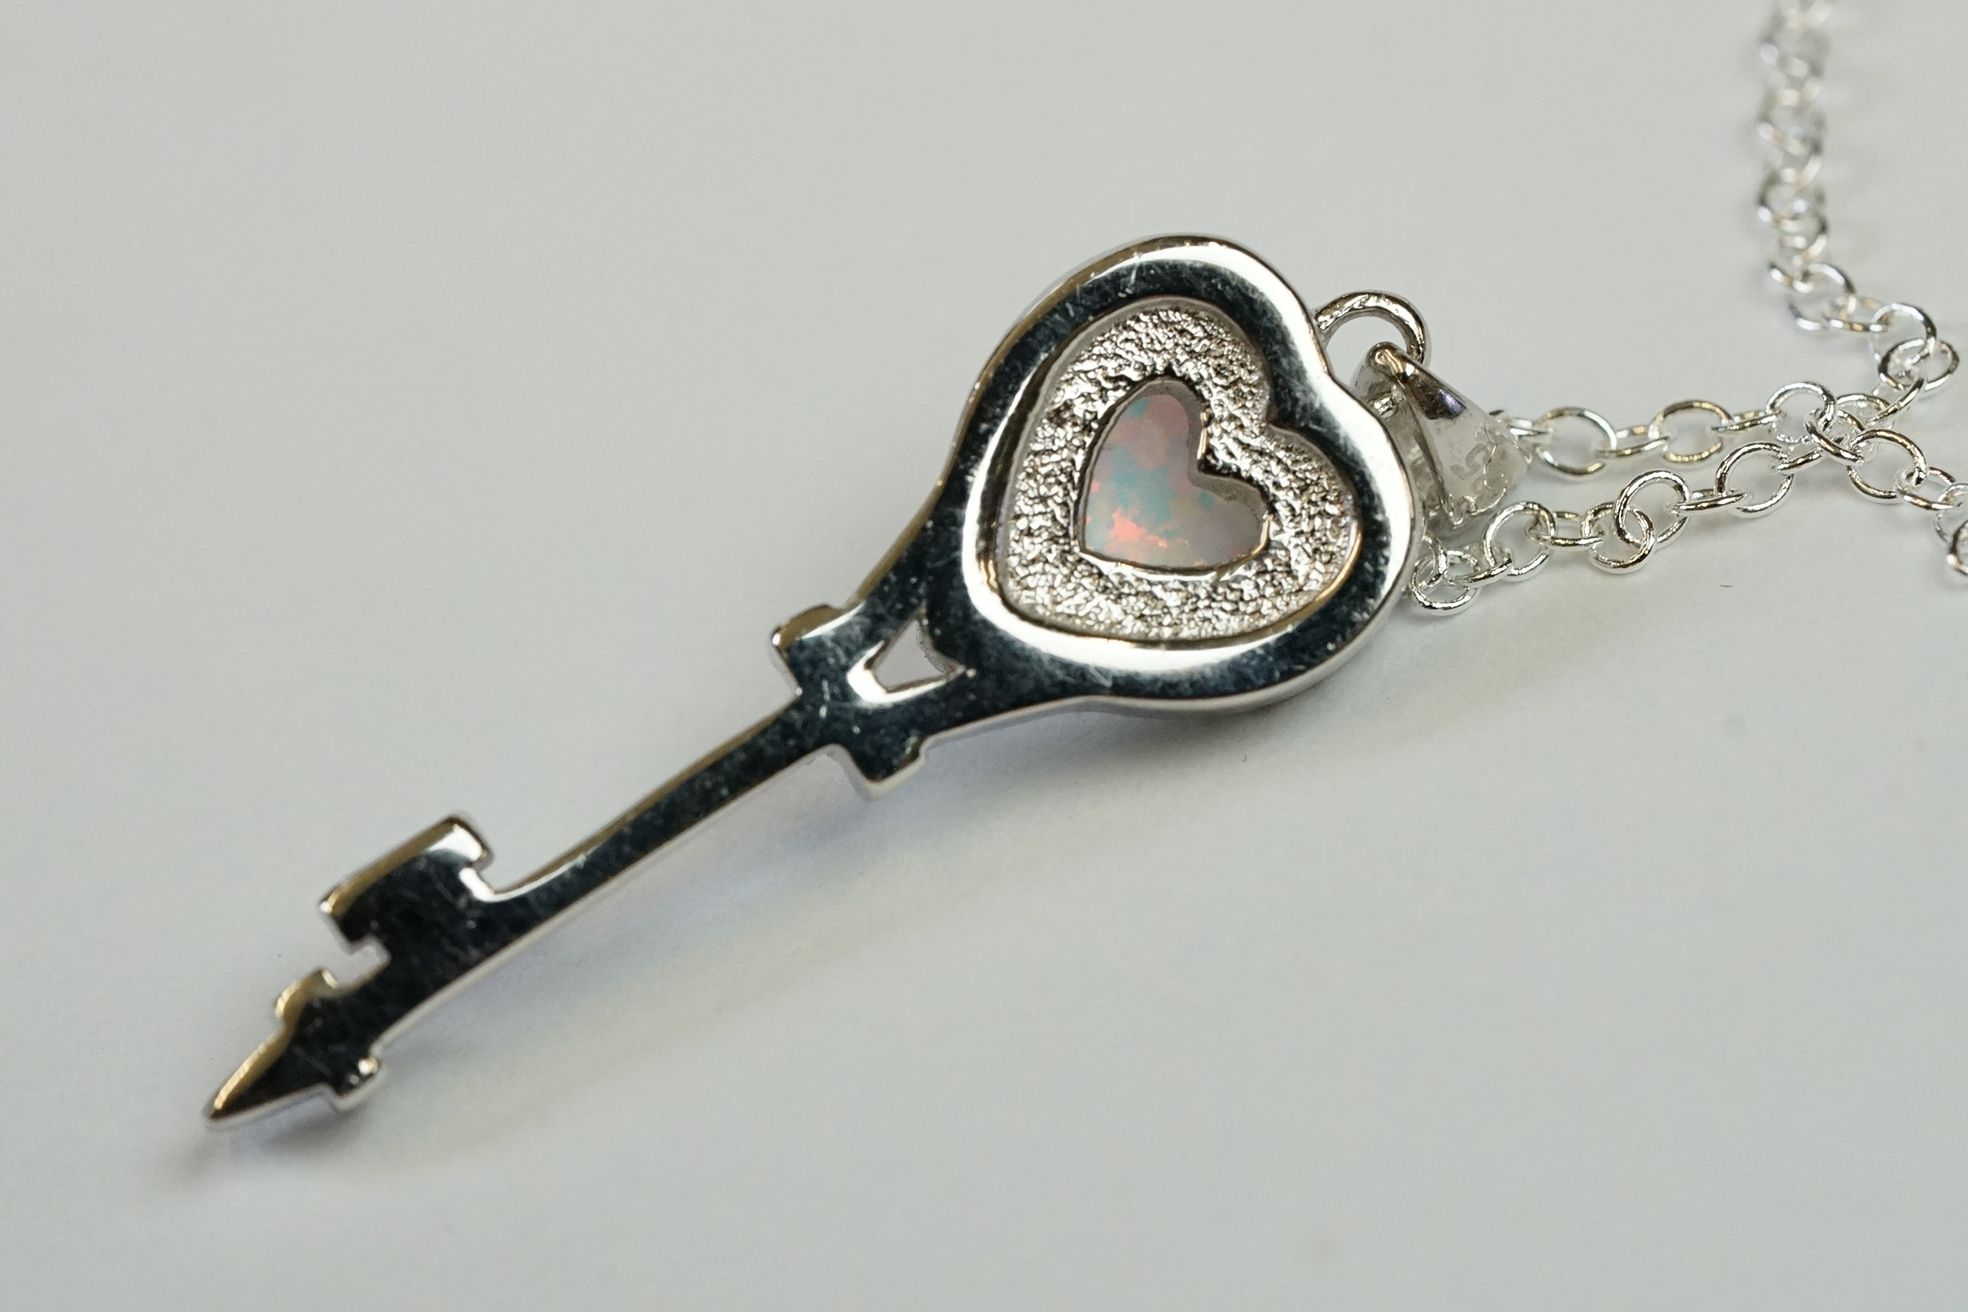 Silver CZ and Opal Key shaped Tiffany style Pendant Necklace - Image 5 of 7